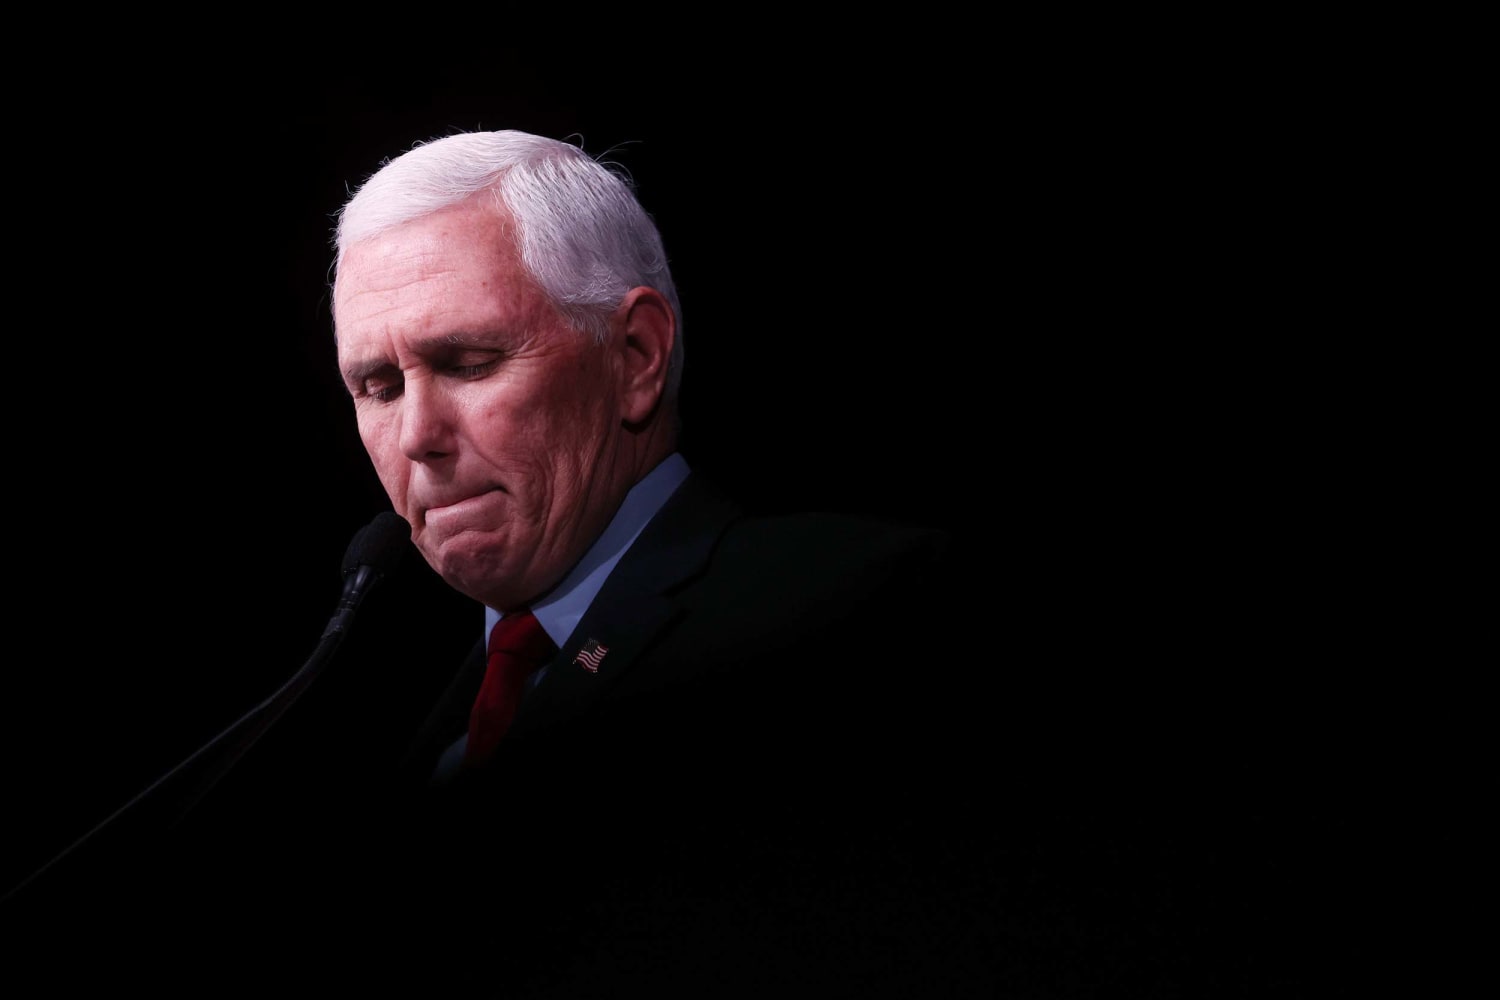 Trump signals that Pence won’t be his running mate again in 2024